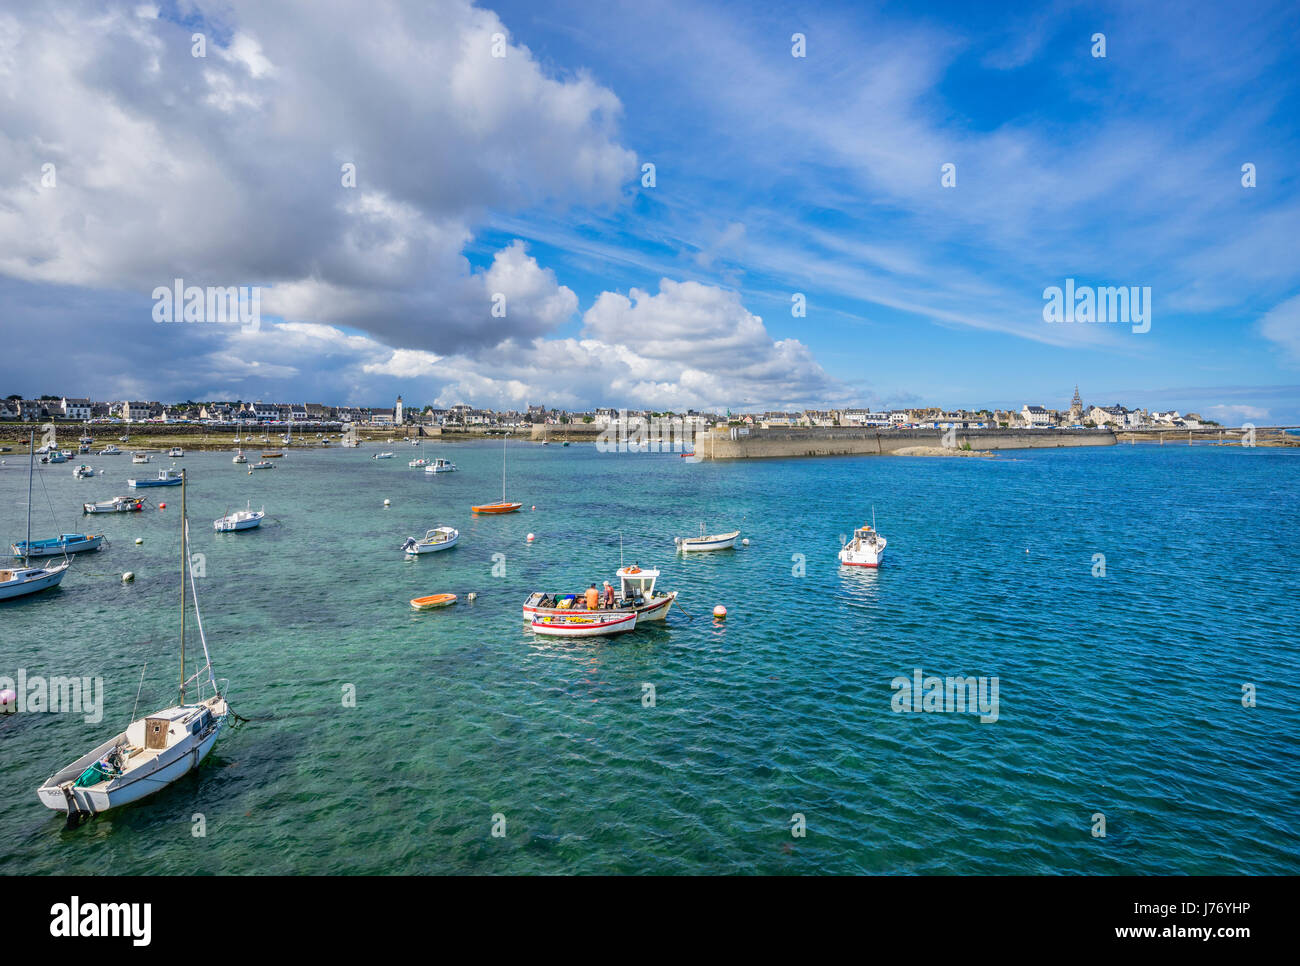 France, Brittany, Finistére department, Roscoff, Vieux Port, the old harbour of Roscoff Stock Photo